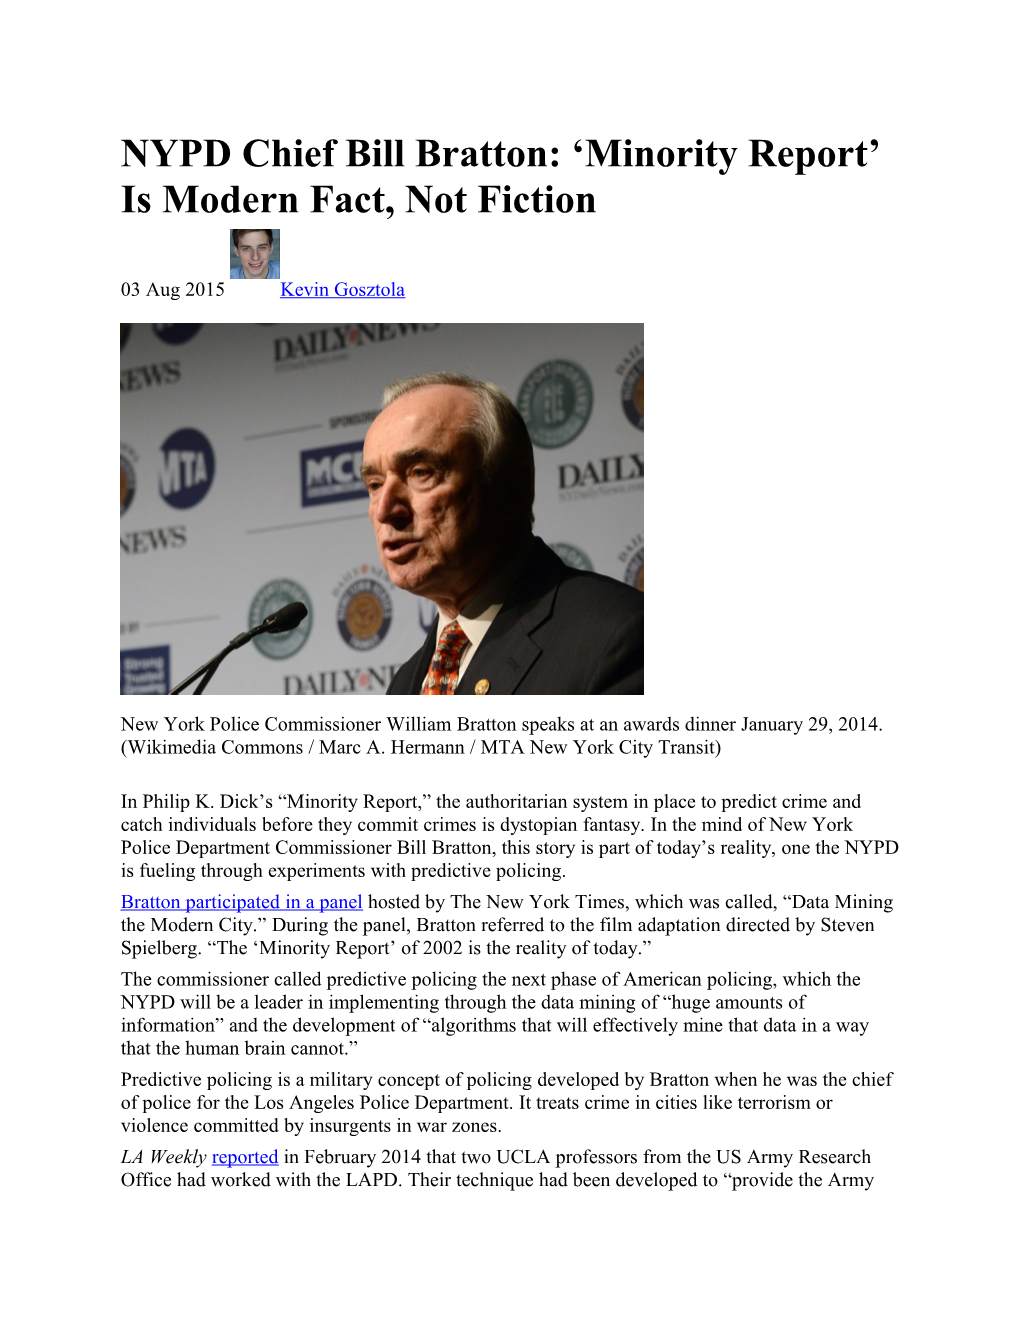 NYPD Chief Bill Bratton: Minority Report Is Modern Fact, Not Fiction